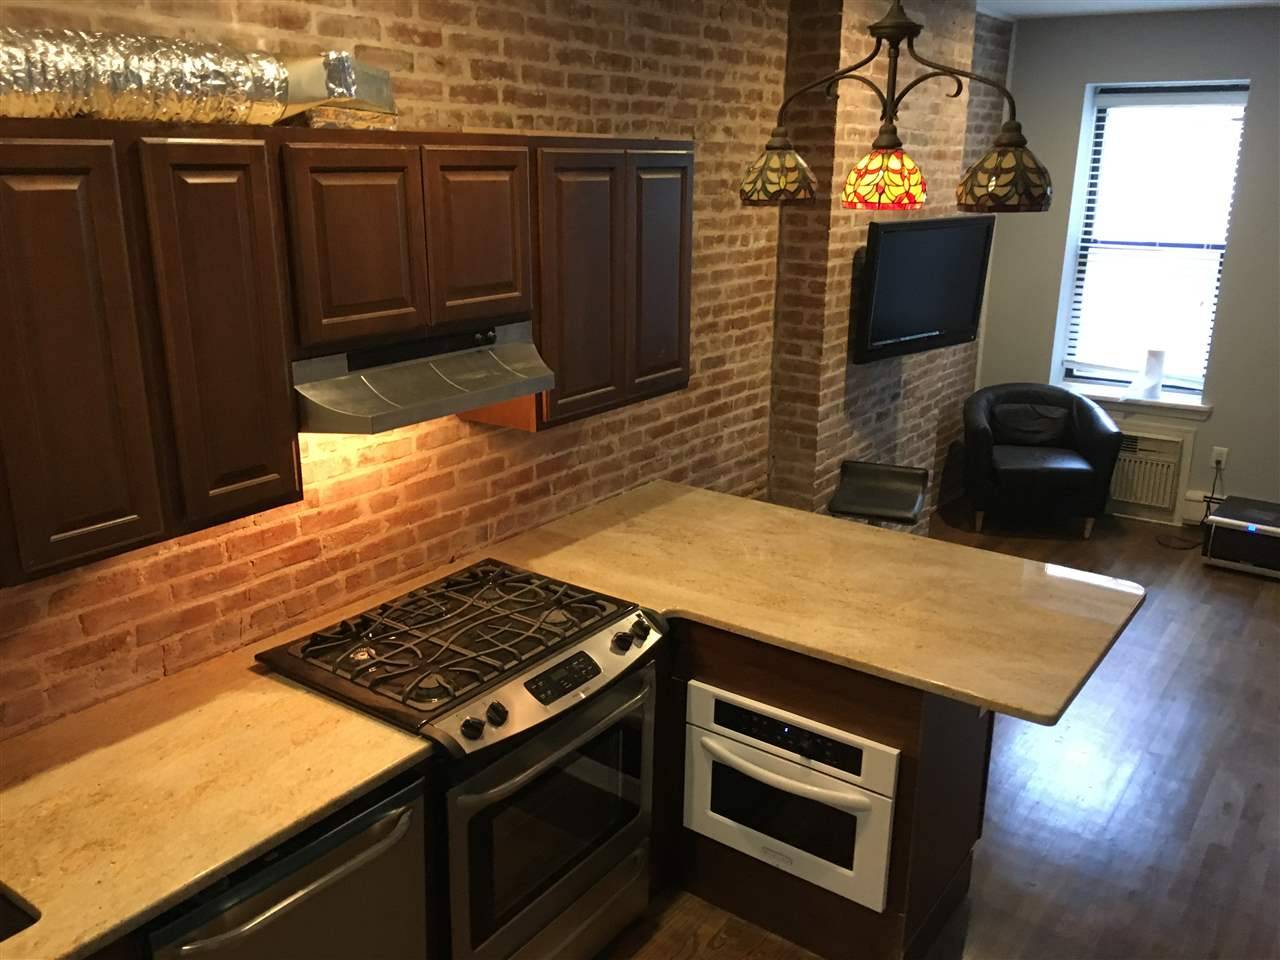 You can't beat this location - 1 BR New Jersey